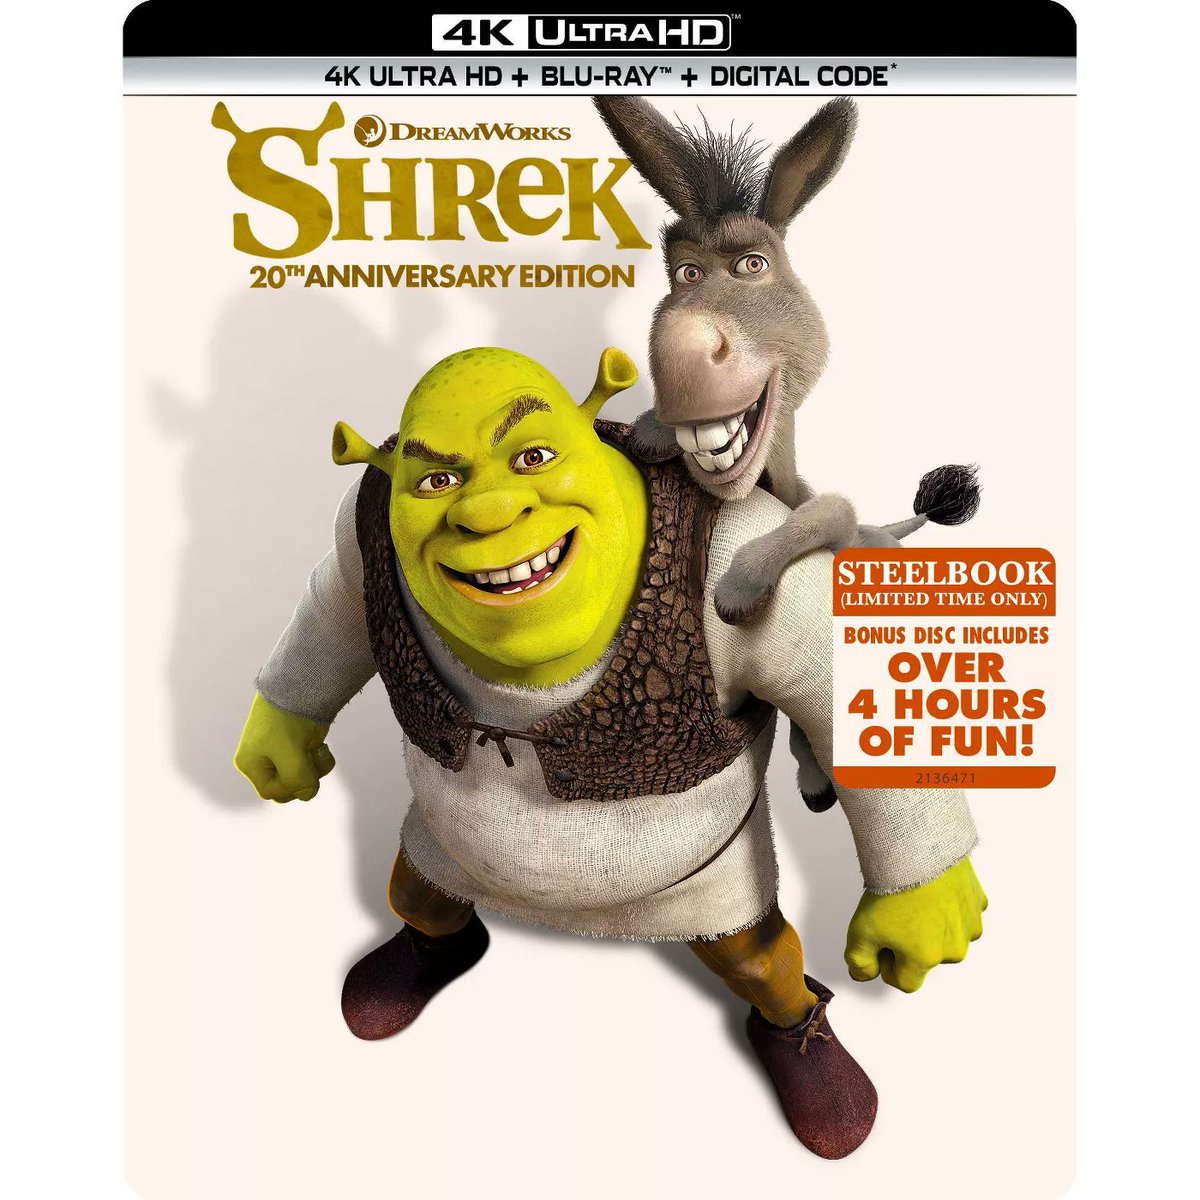 On this day, 3 years ago, Shrek was released on 4K UHD with a standard and Steelbook release for its 20th Anniversary. (May 11th, 2021) 💿💿